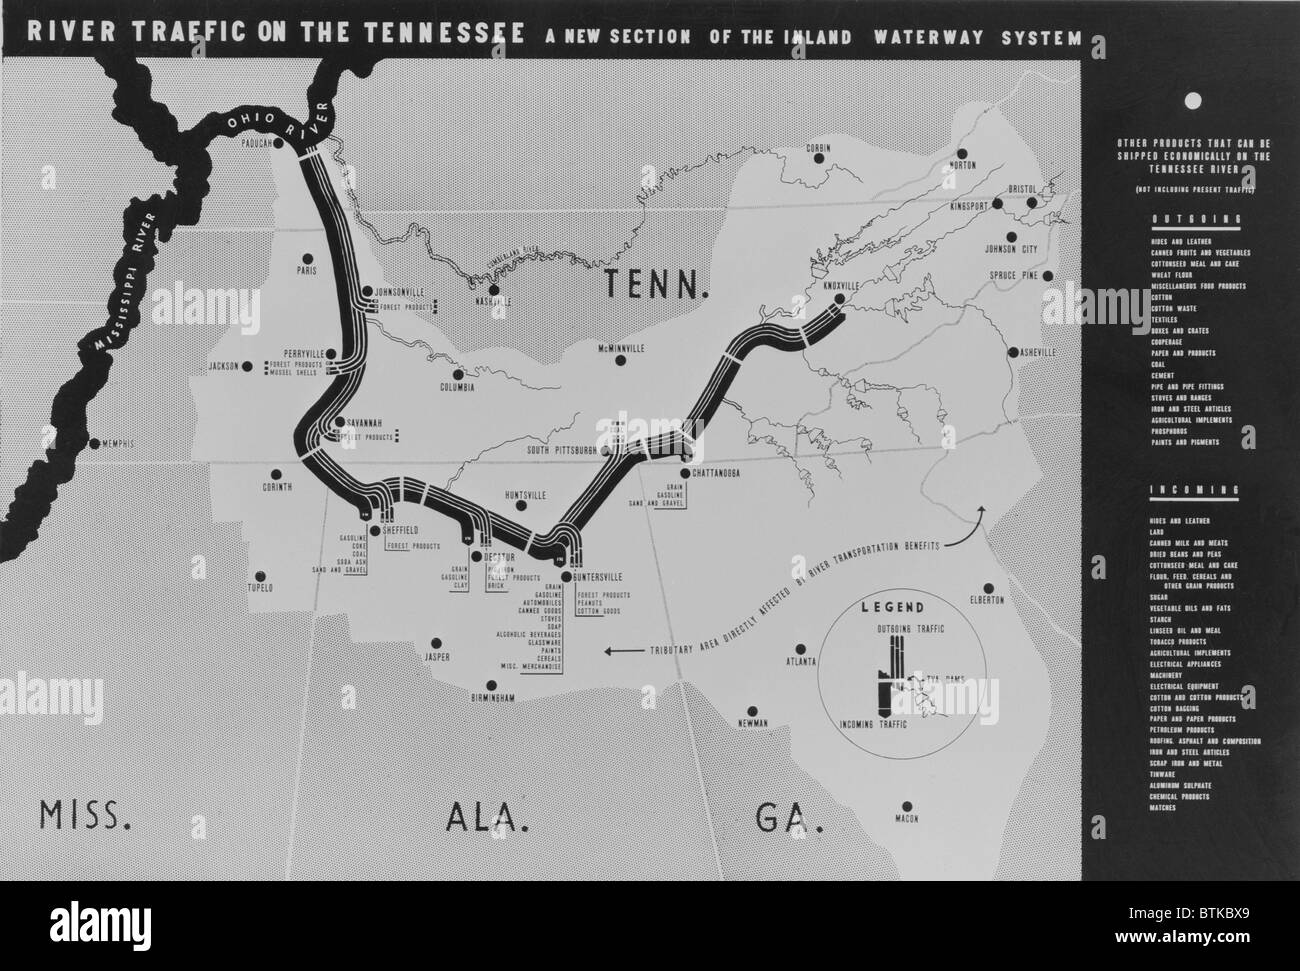 Map diagrams the river transport development plan for the New Deal public works project authorized when President Franklin D. Roosevelt signed the Tennessee Valley Authority Act on May 18, 1933, during the First Hundred Days of his administration. Stock Photo